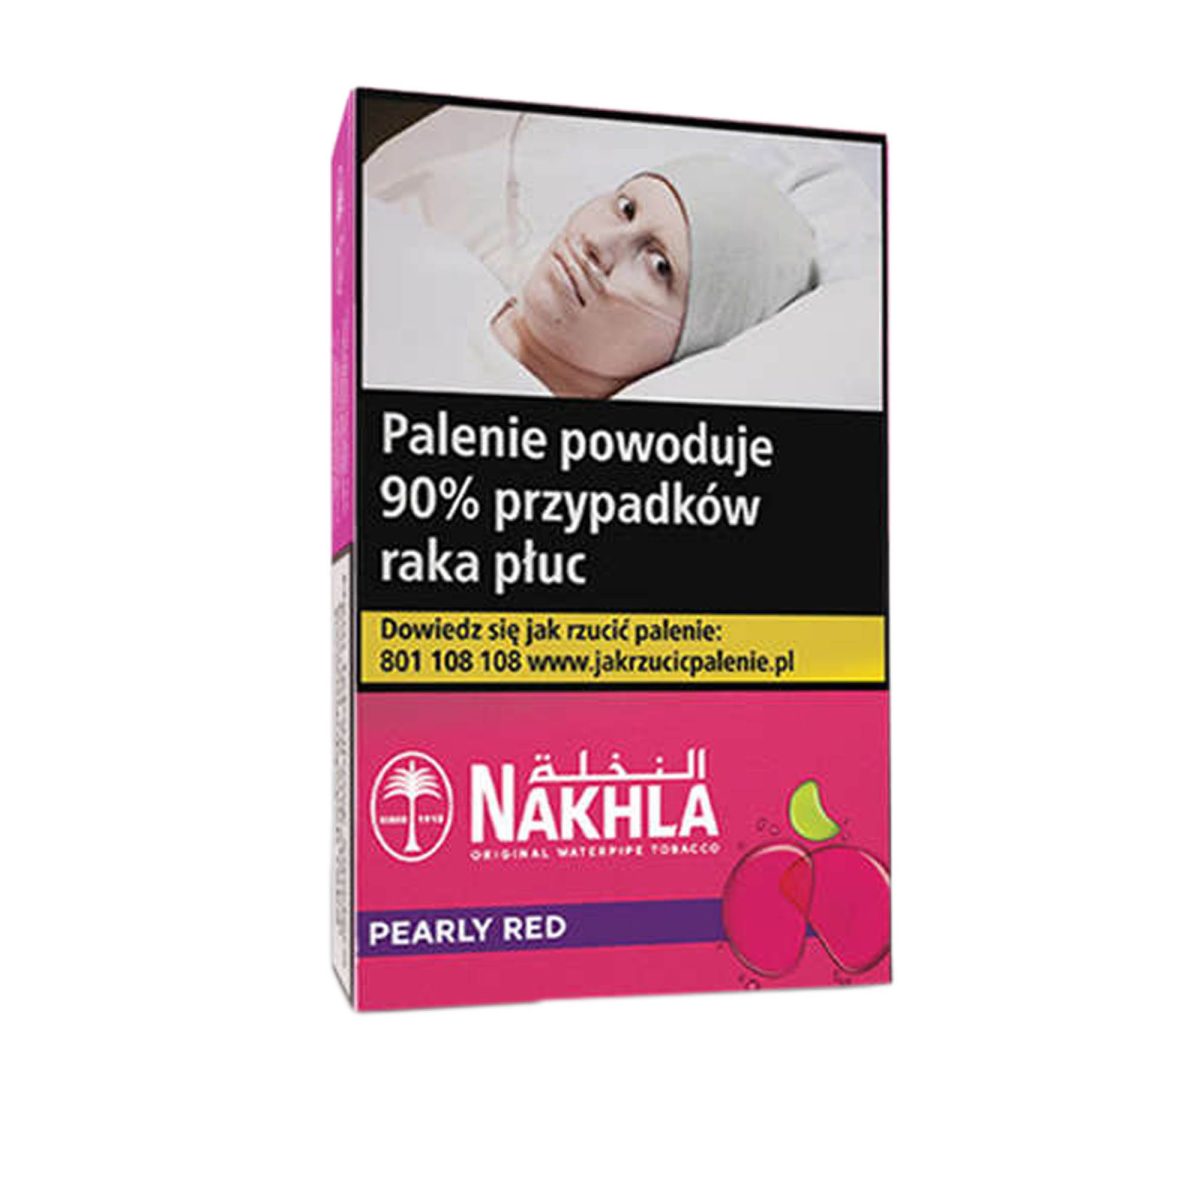 Nakhla Pearly Red 50g